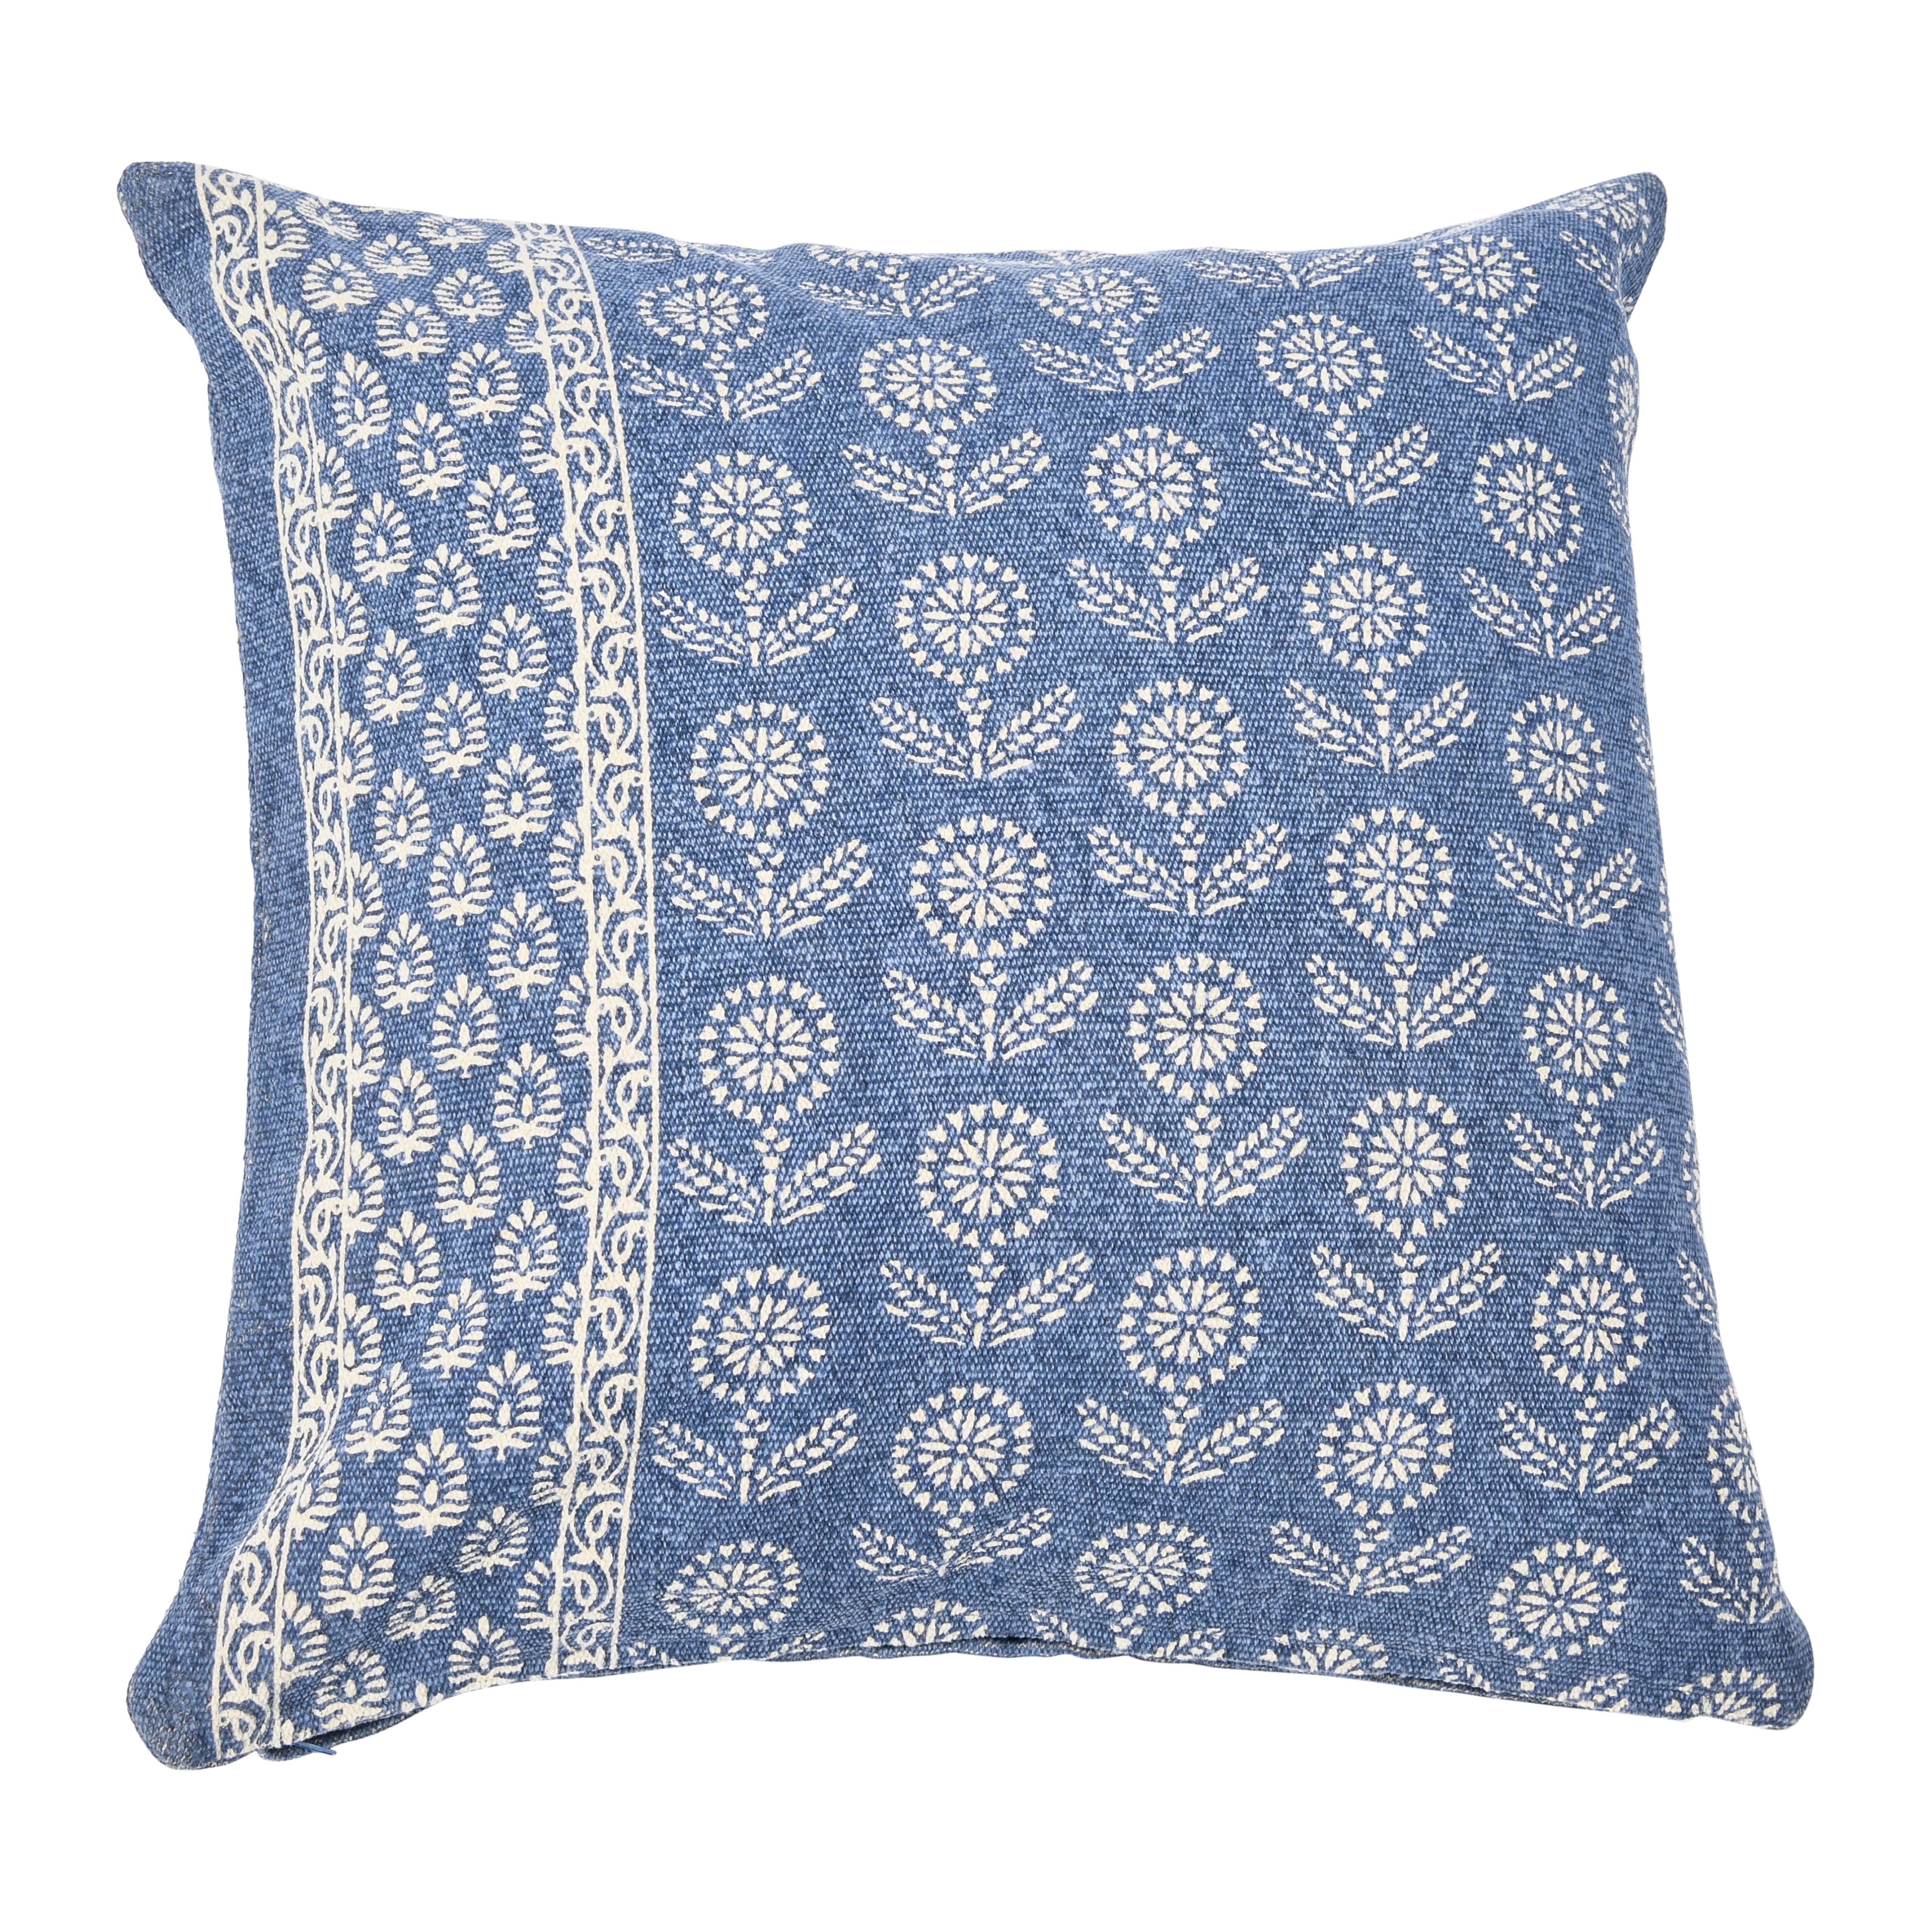 20" Square Floral Fields Pillow - Image 0